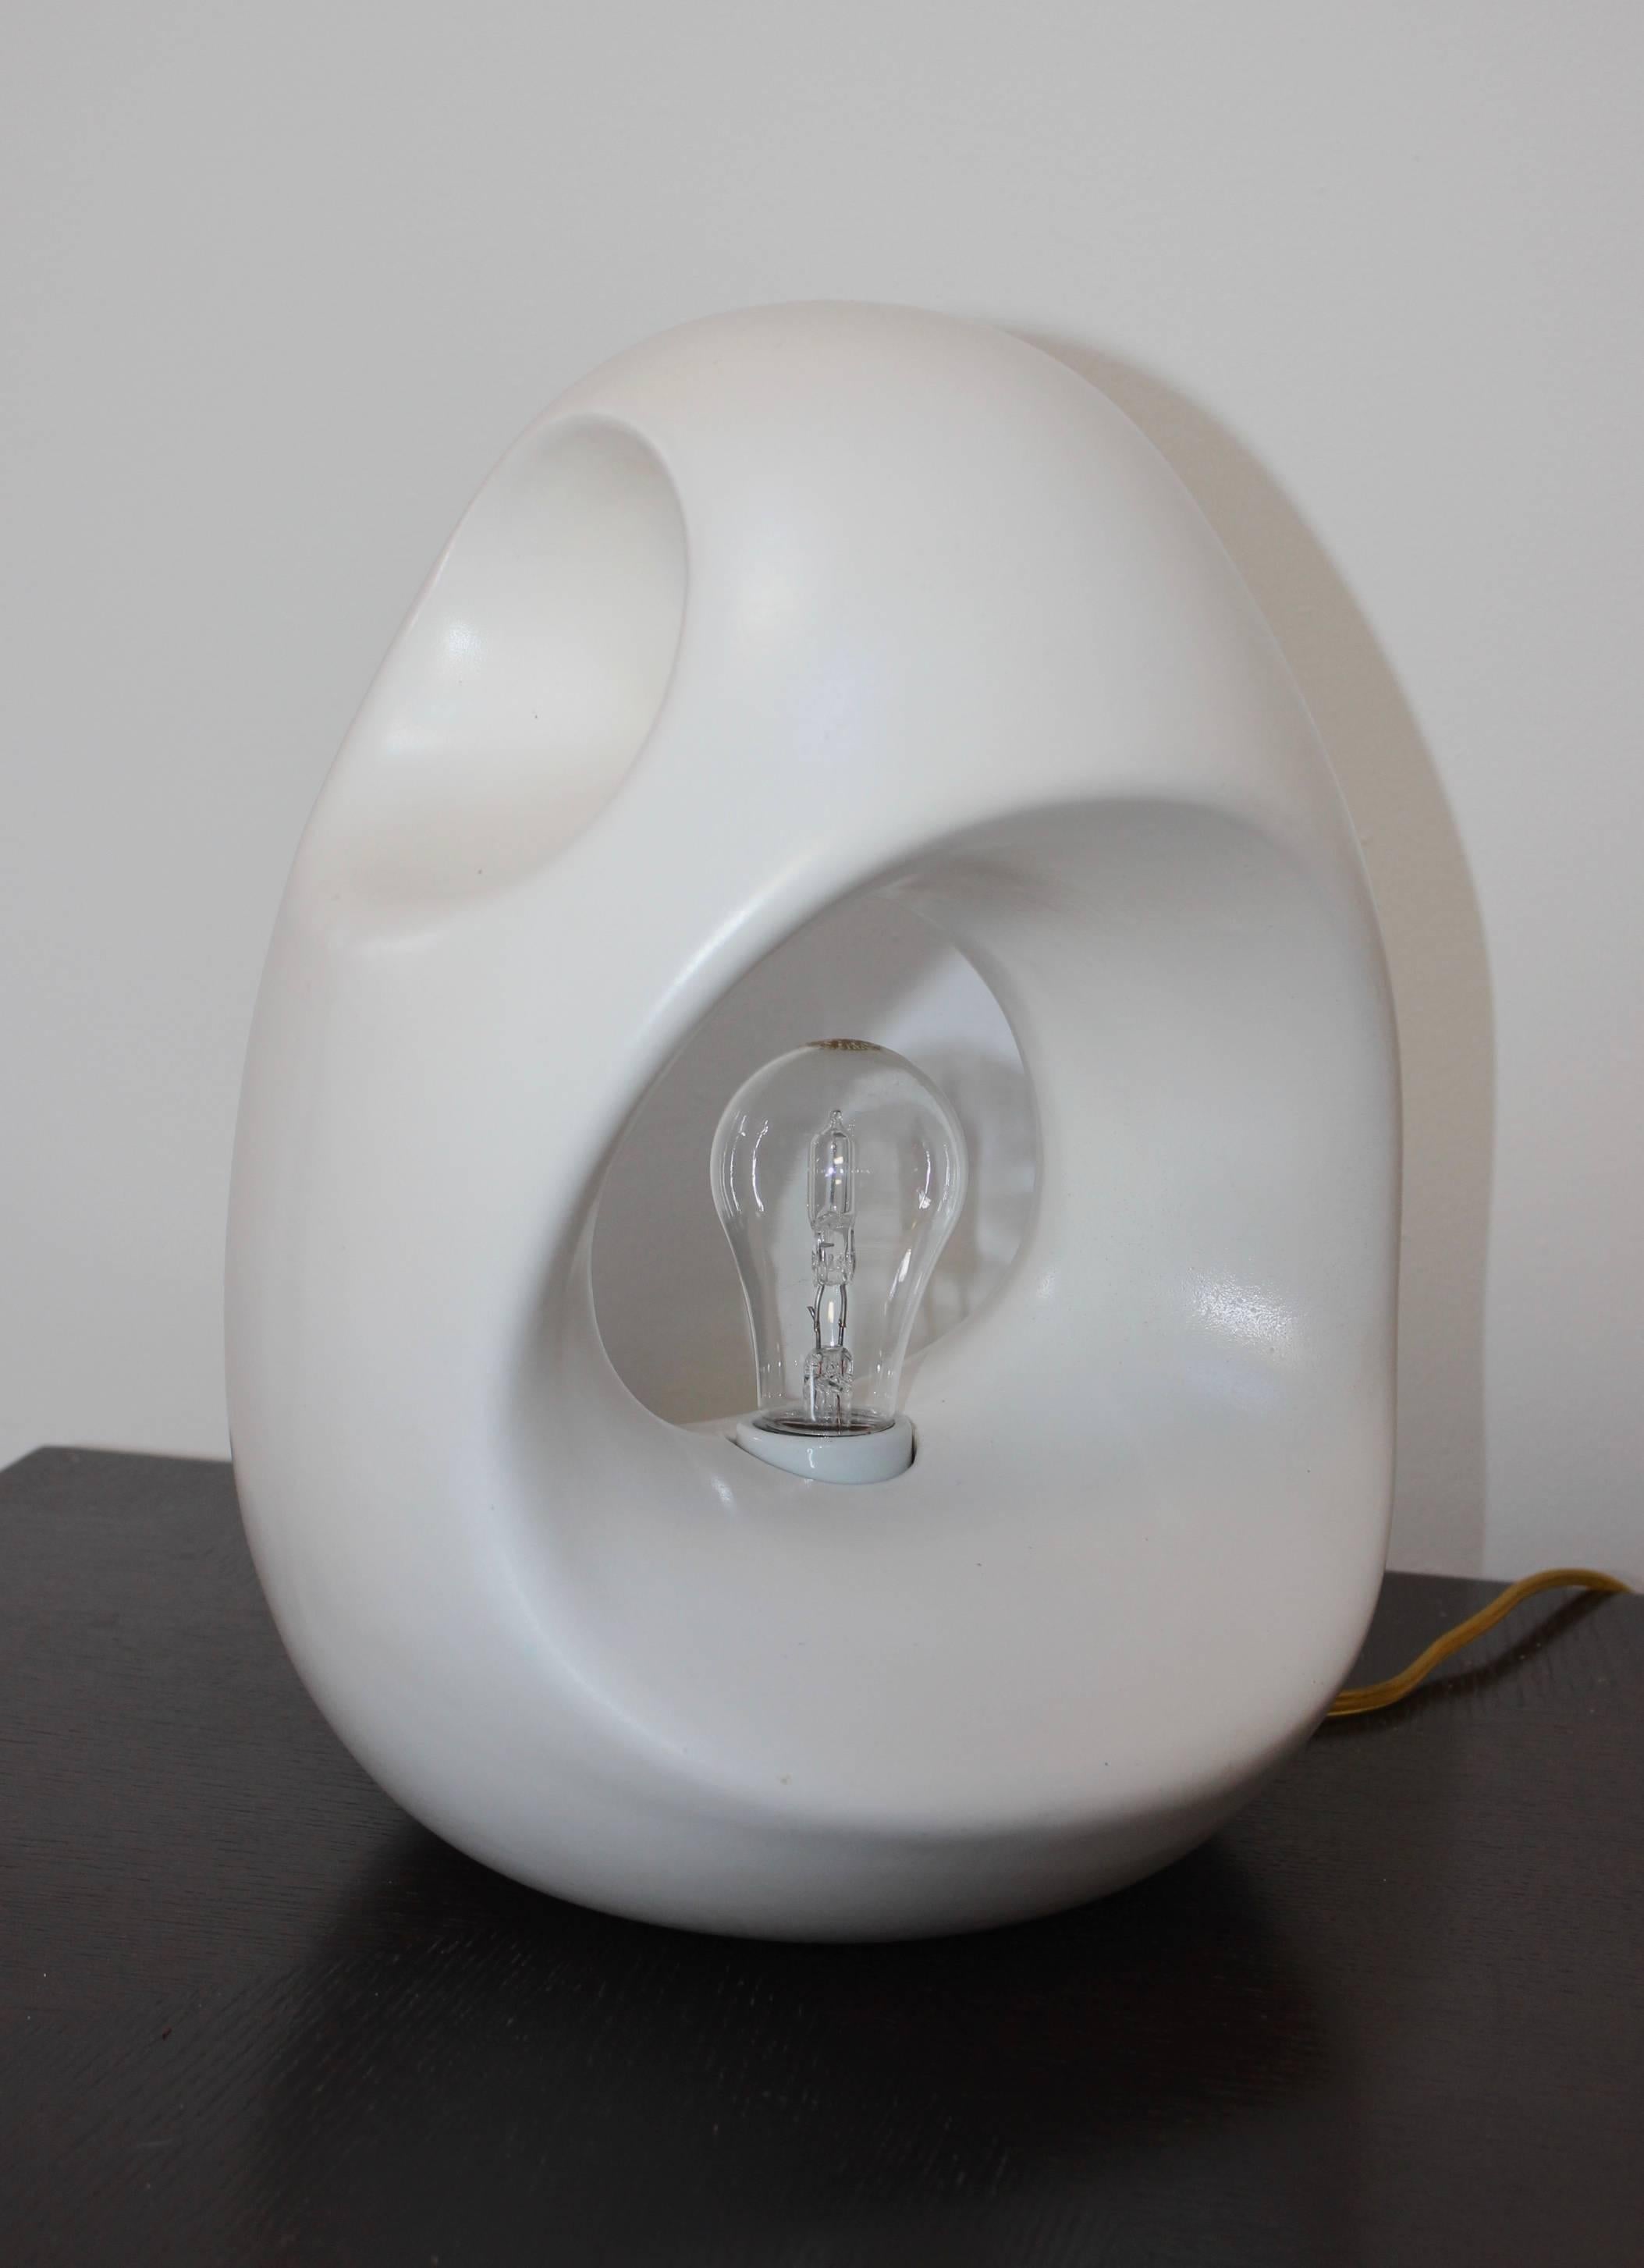 Stunning 1960s sculptural ceramic table lamp, newly rewired and ready to use.